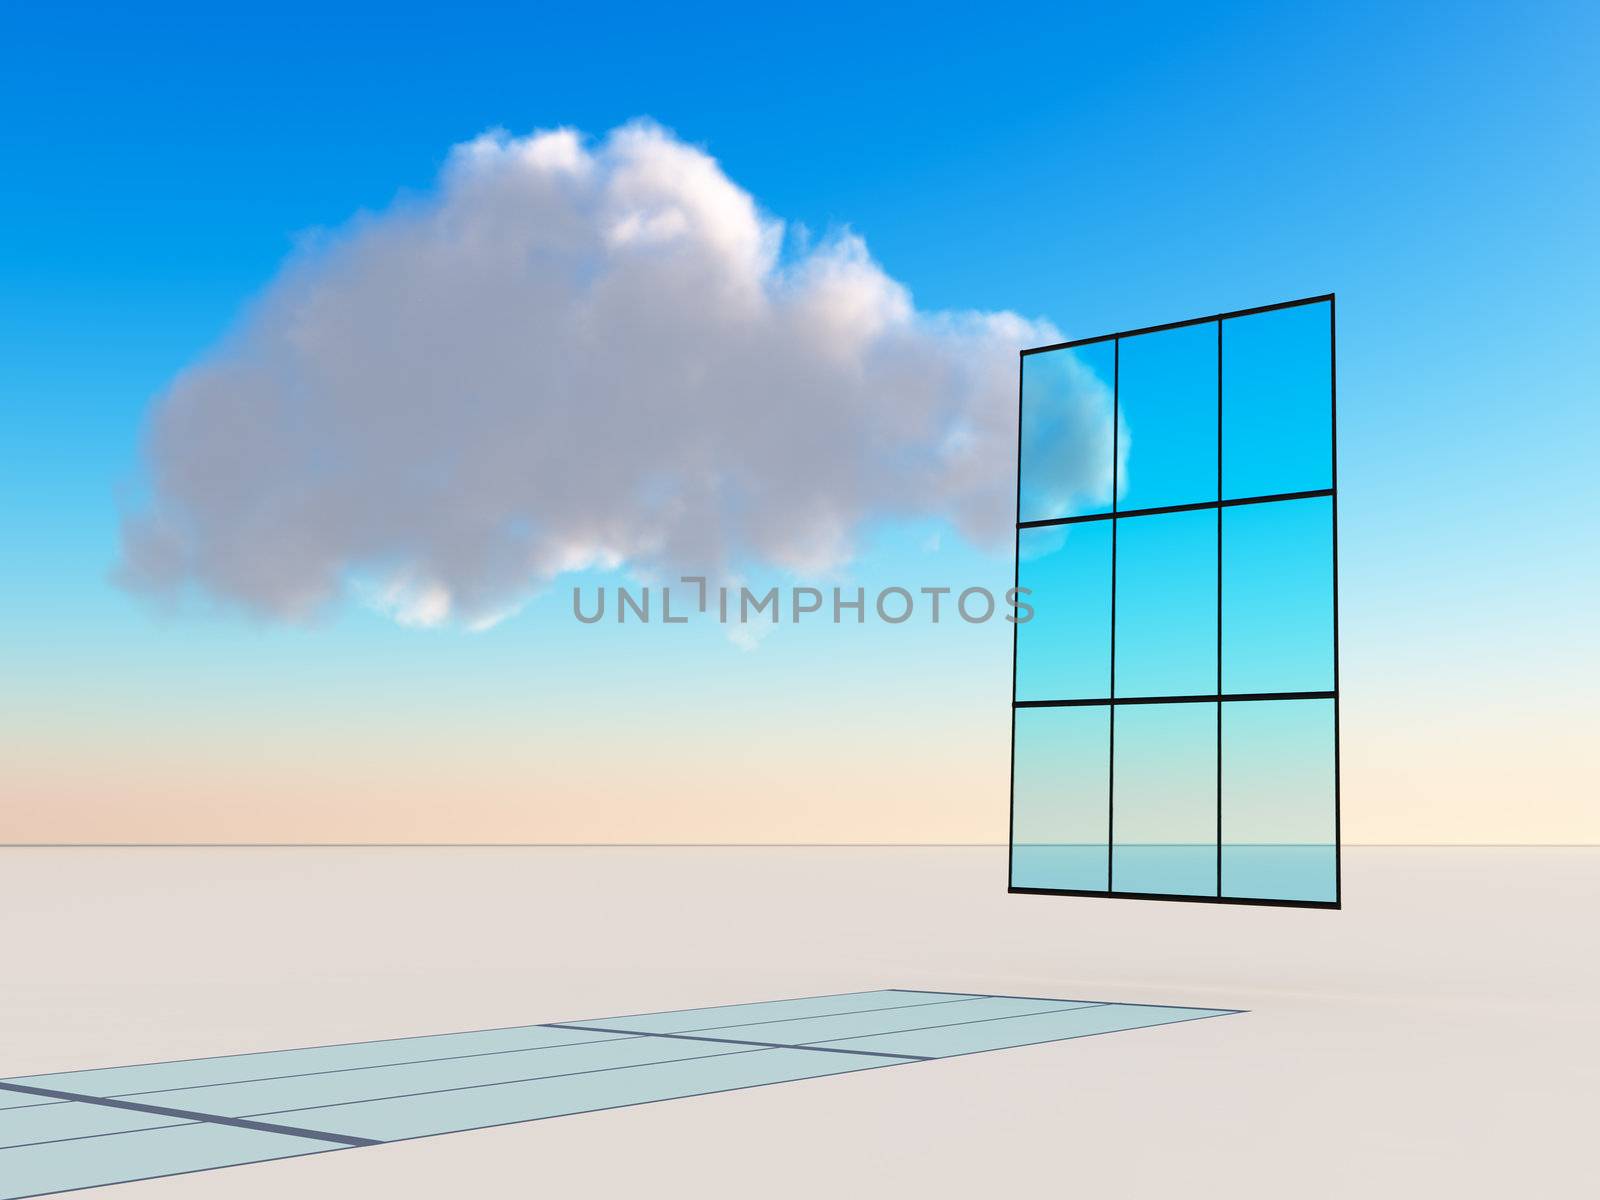 Abstract business or technology concept for future trend or forecasting using a cloud floating by window over a simple bright horizon